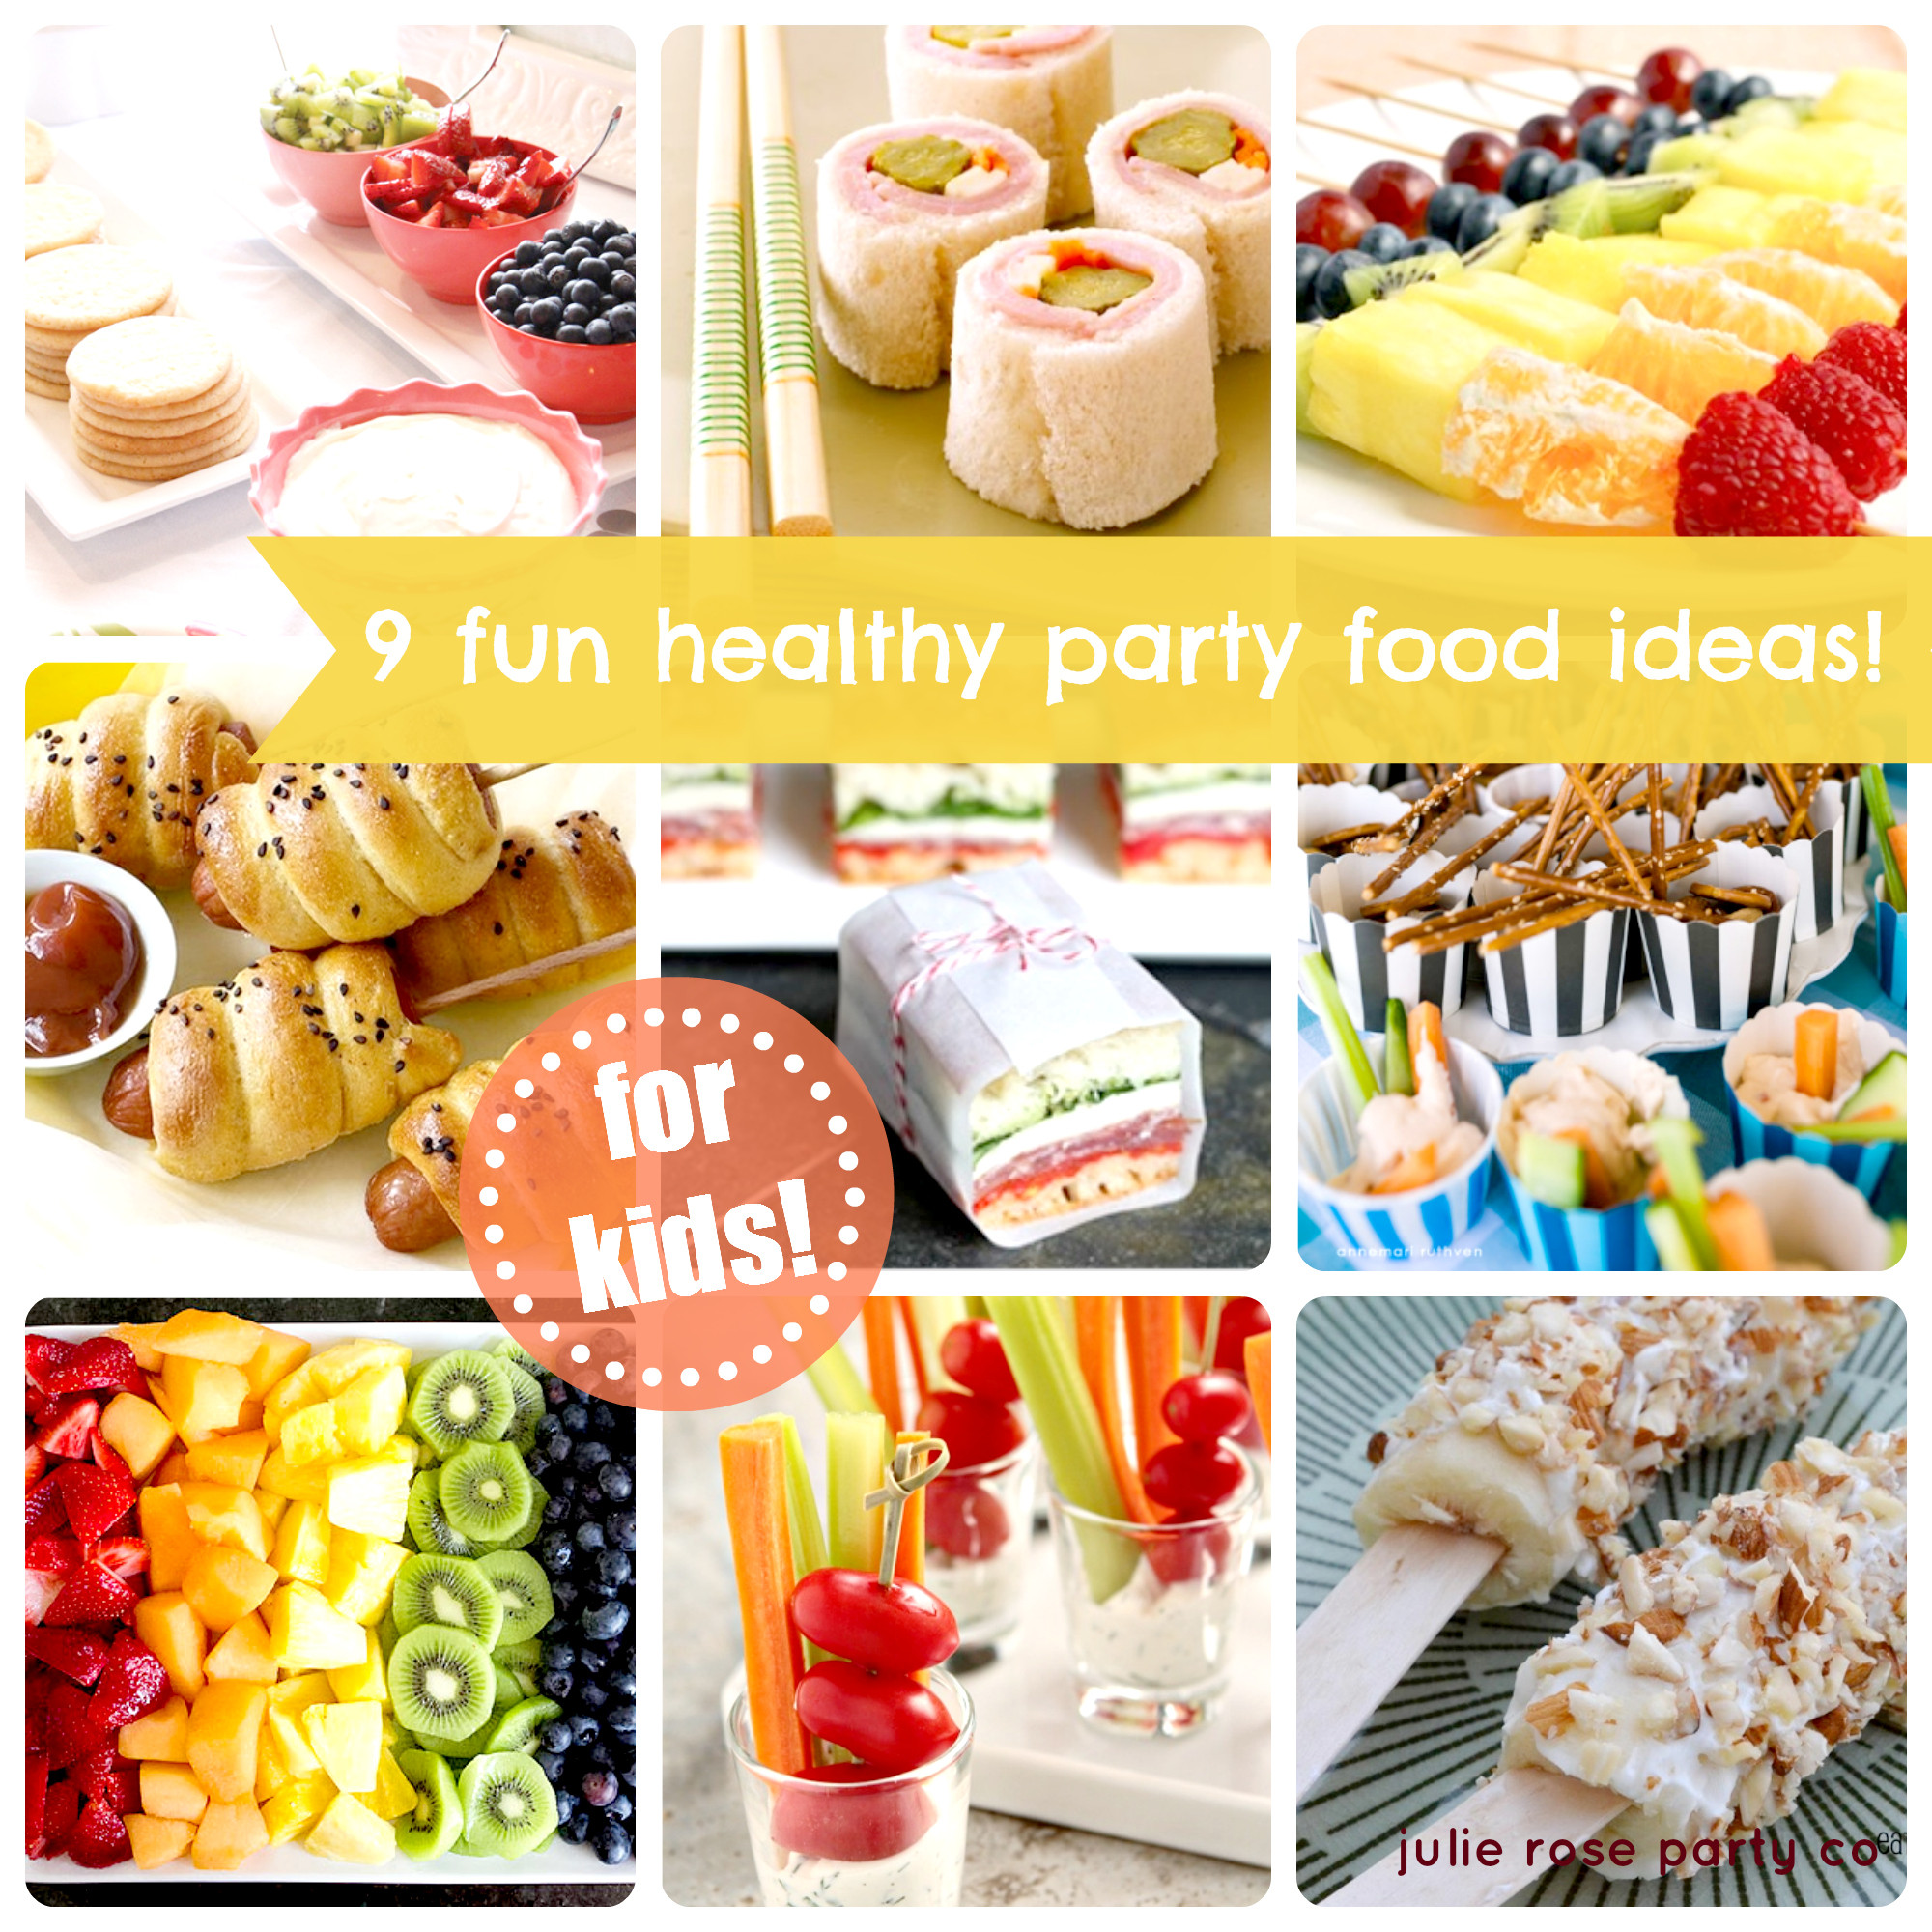 Toddler Party Food Ideas
 9 fun and healthy party food ideas kids